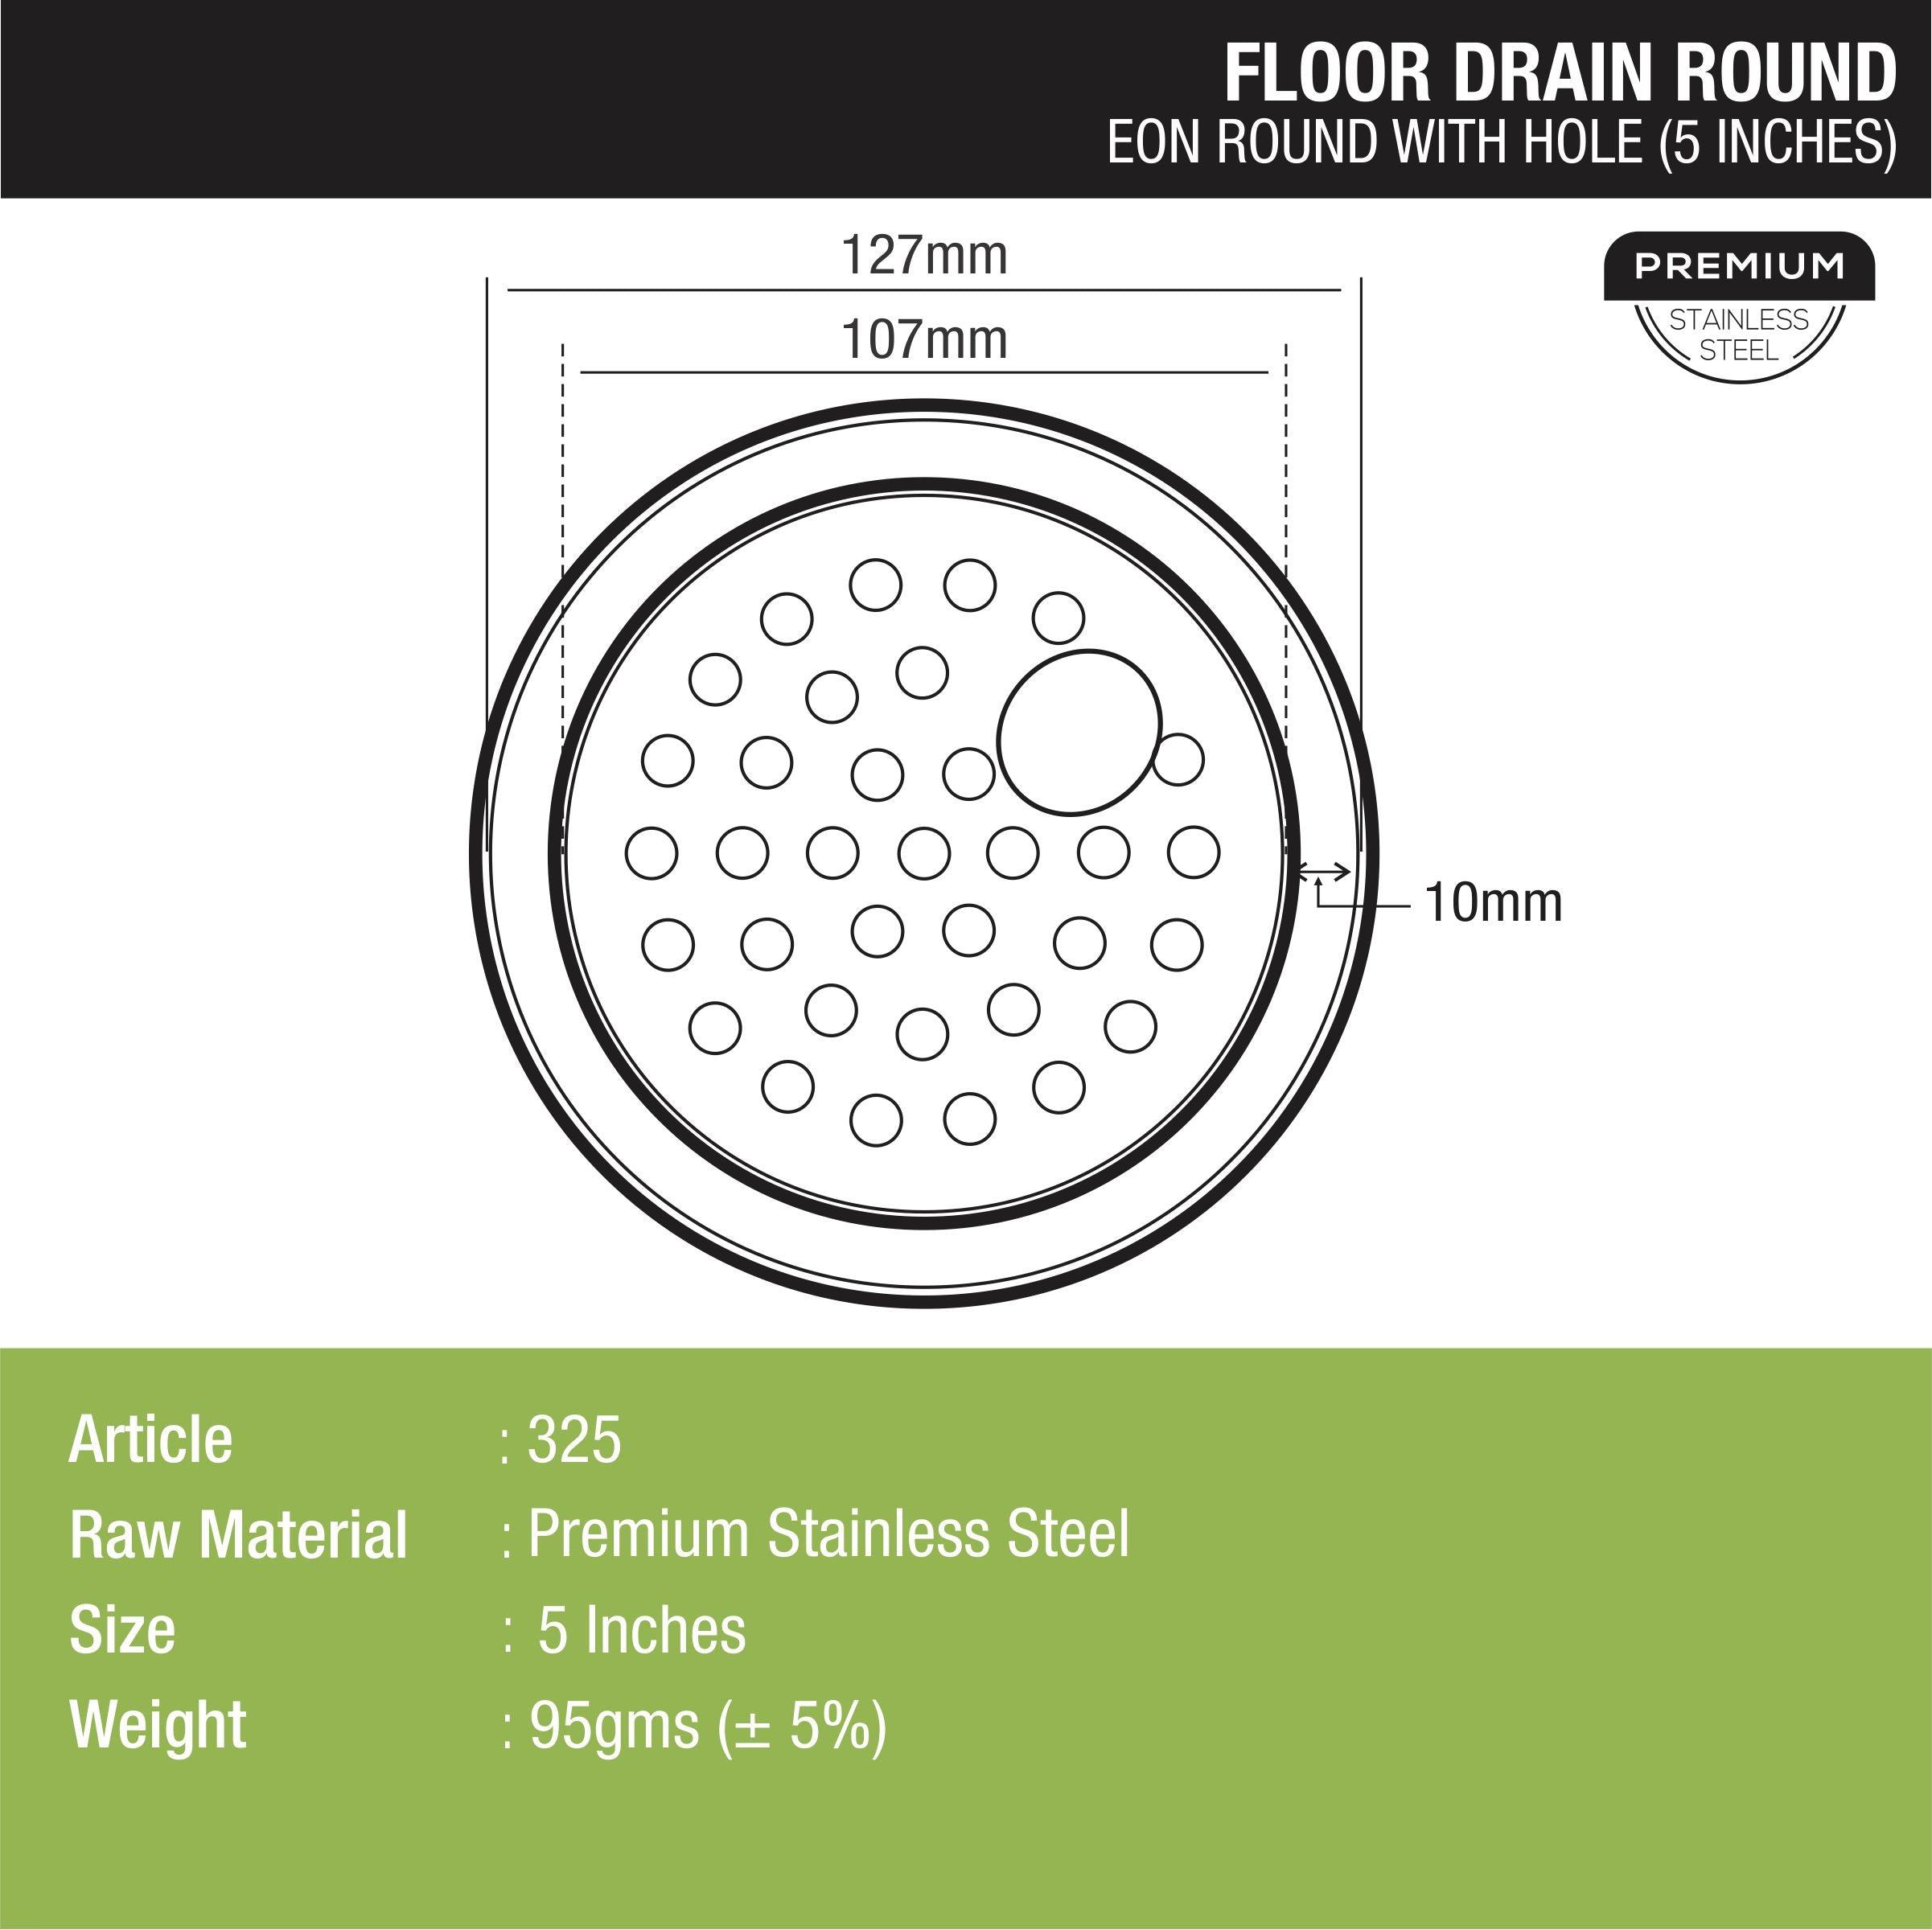 EON Round Floor Drain with Hole (5 inches) dimensions and sizes